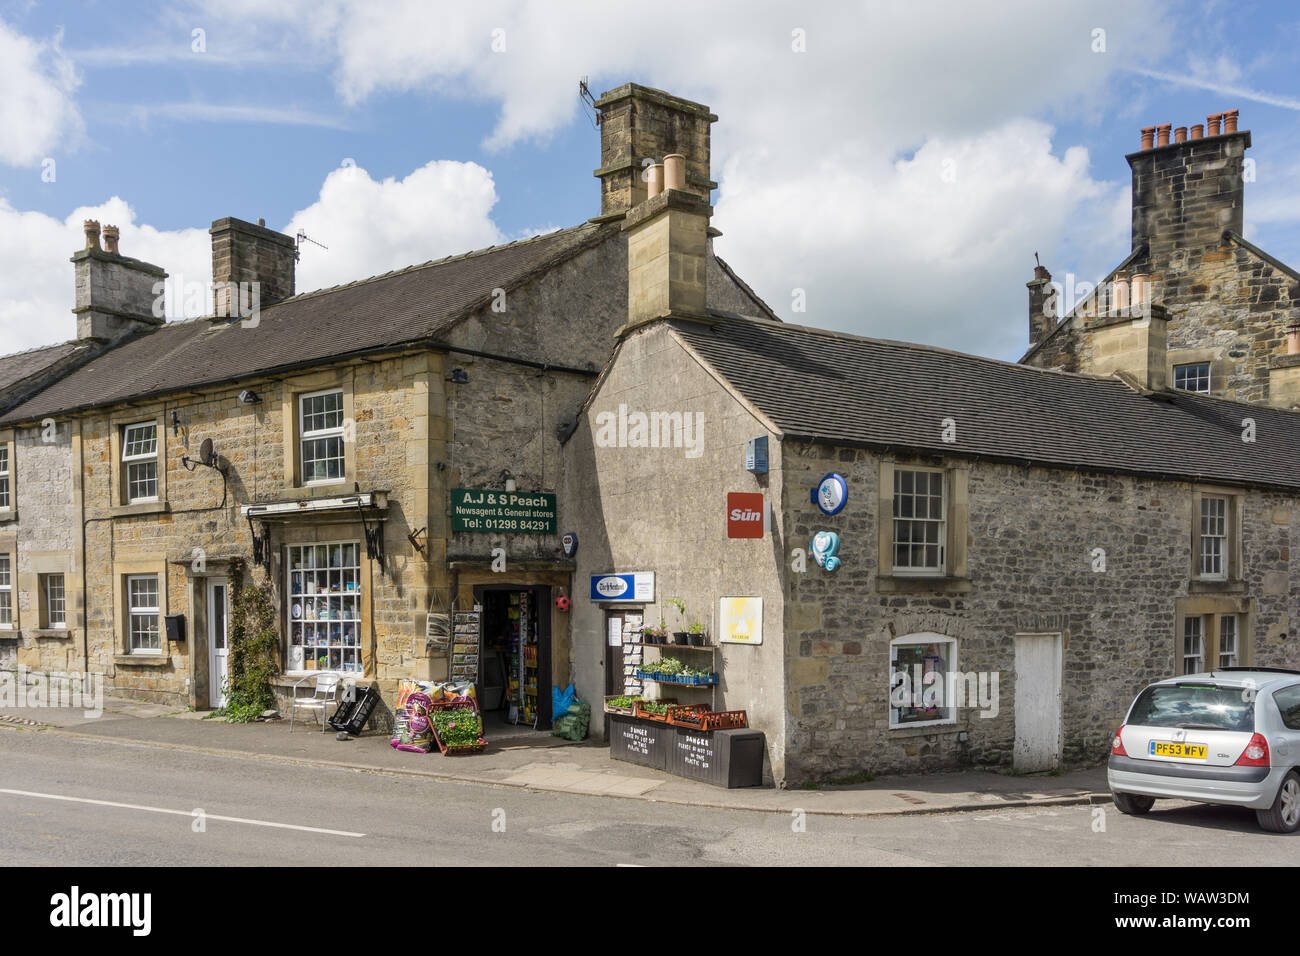 A J & S Peach,newsagent and general store, in the picturesque Peak District village of Hartington, Derbyshire, UK Stock Photo